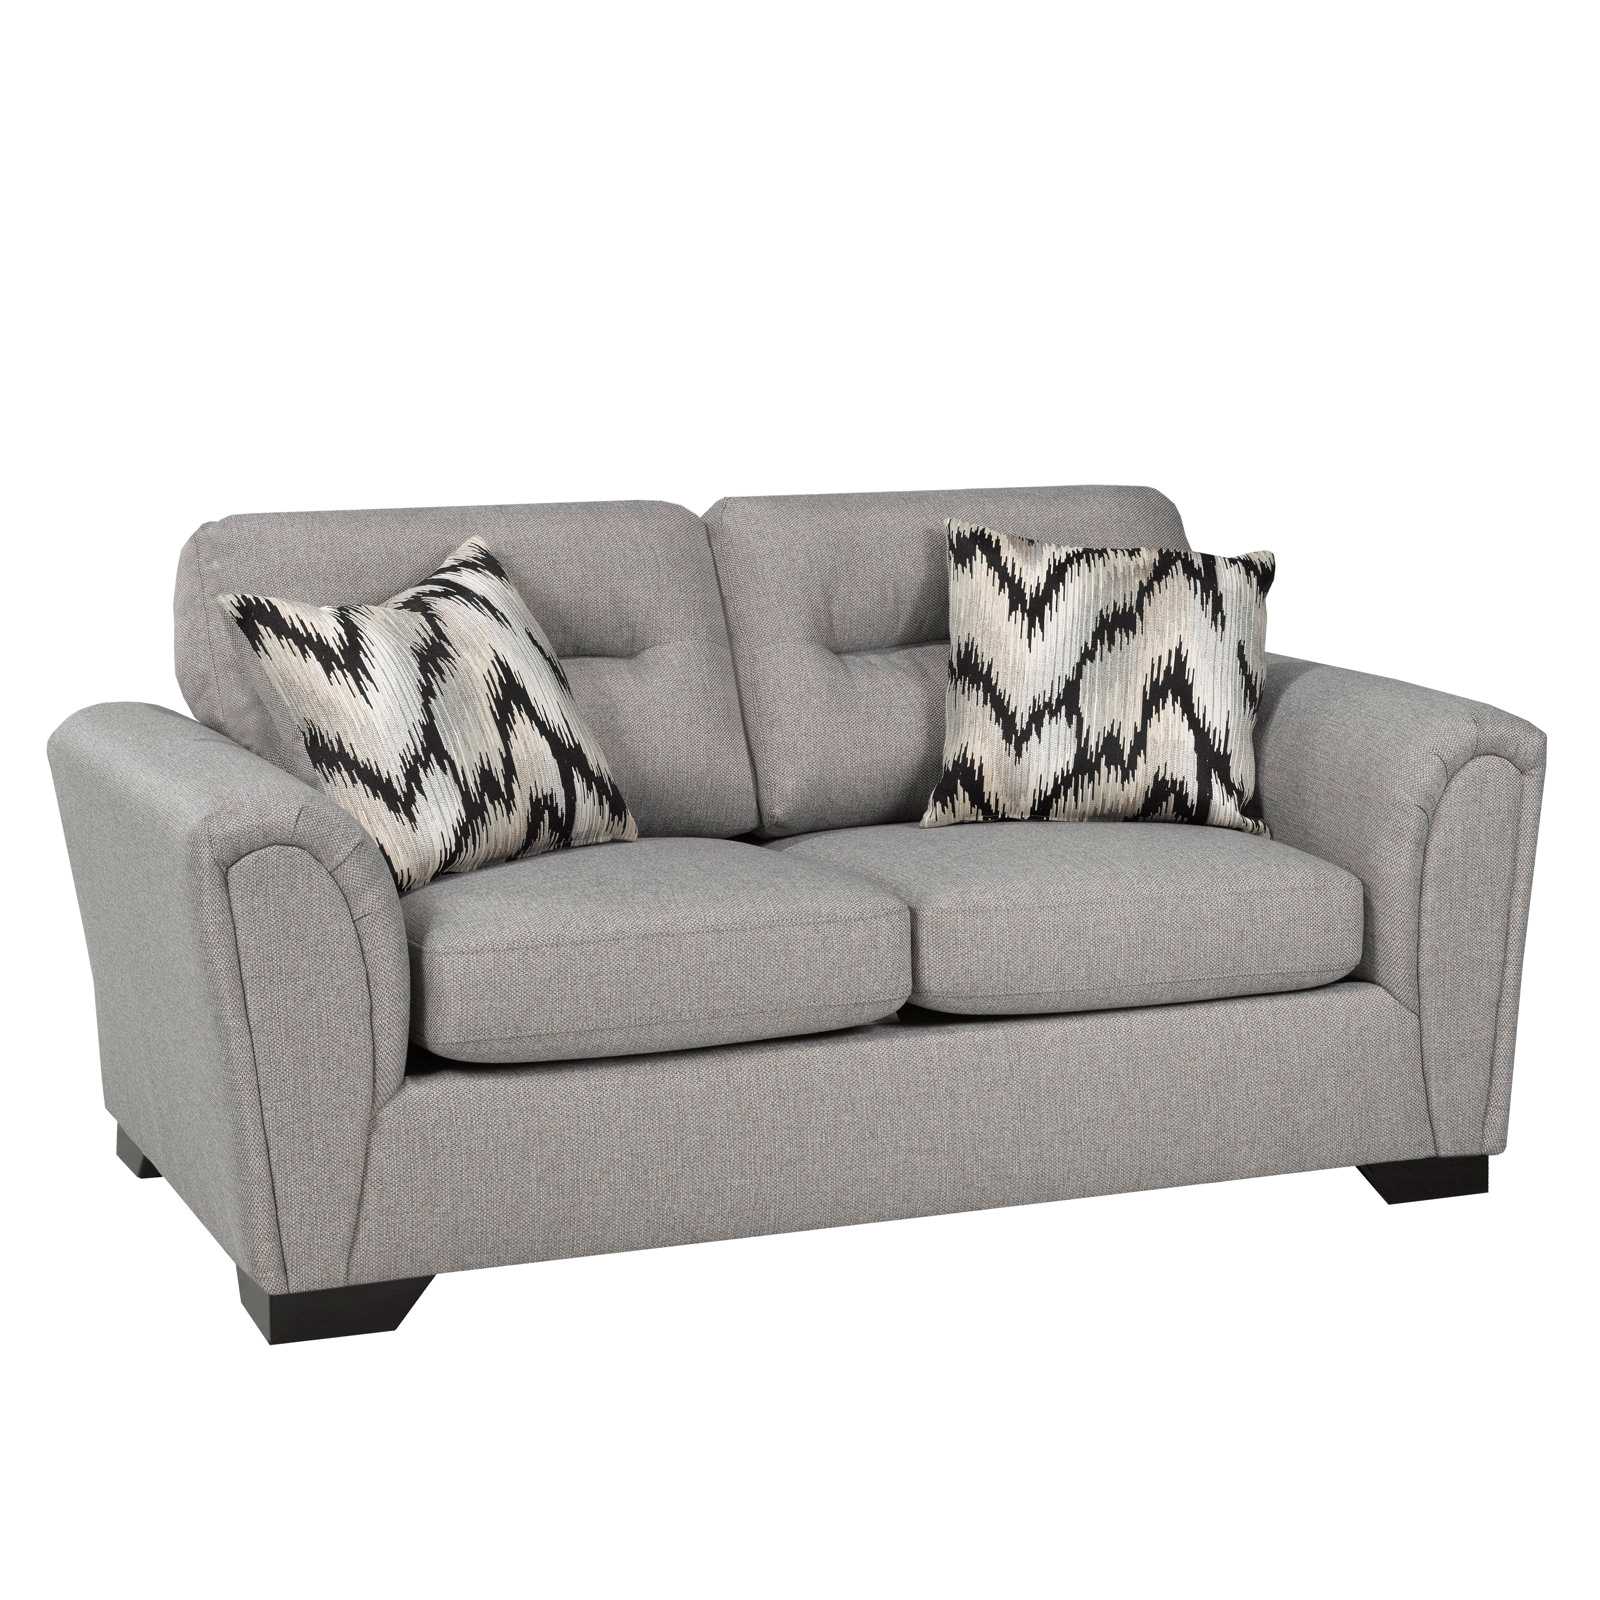 Canadian Made Zesus Fawn Sofa Collection 9559